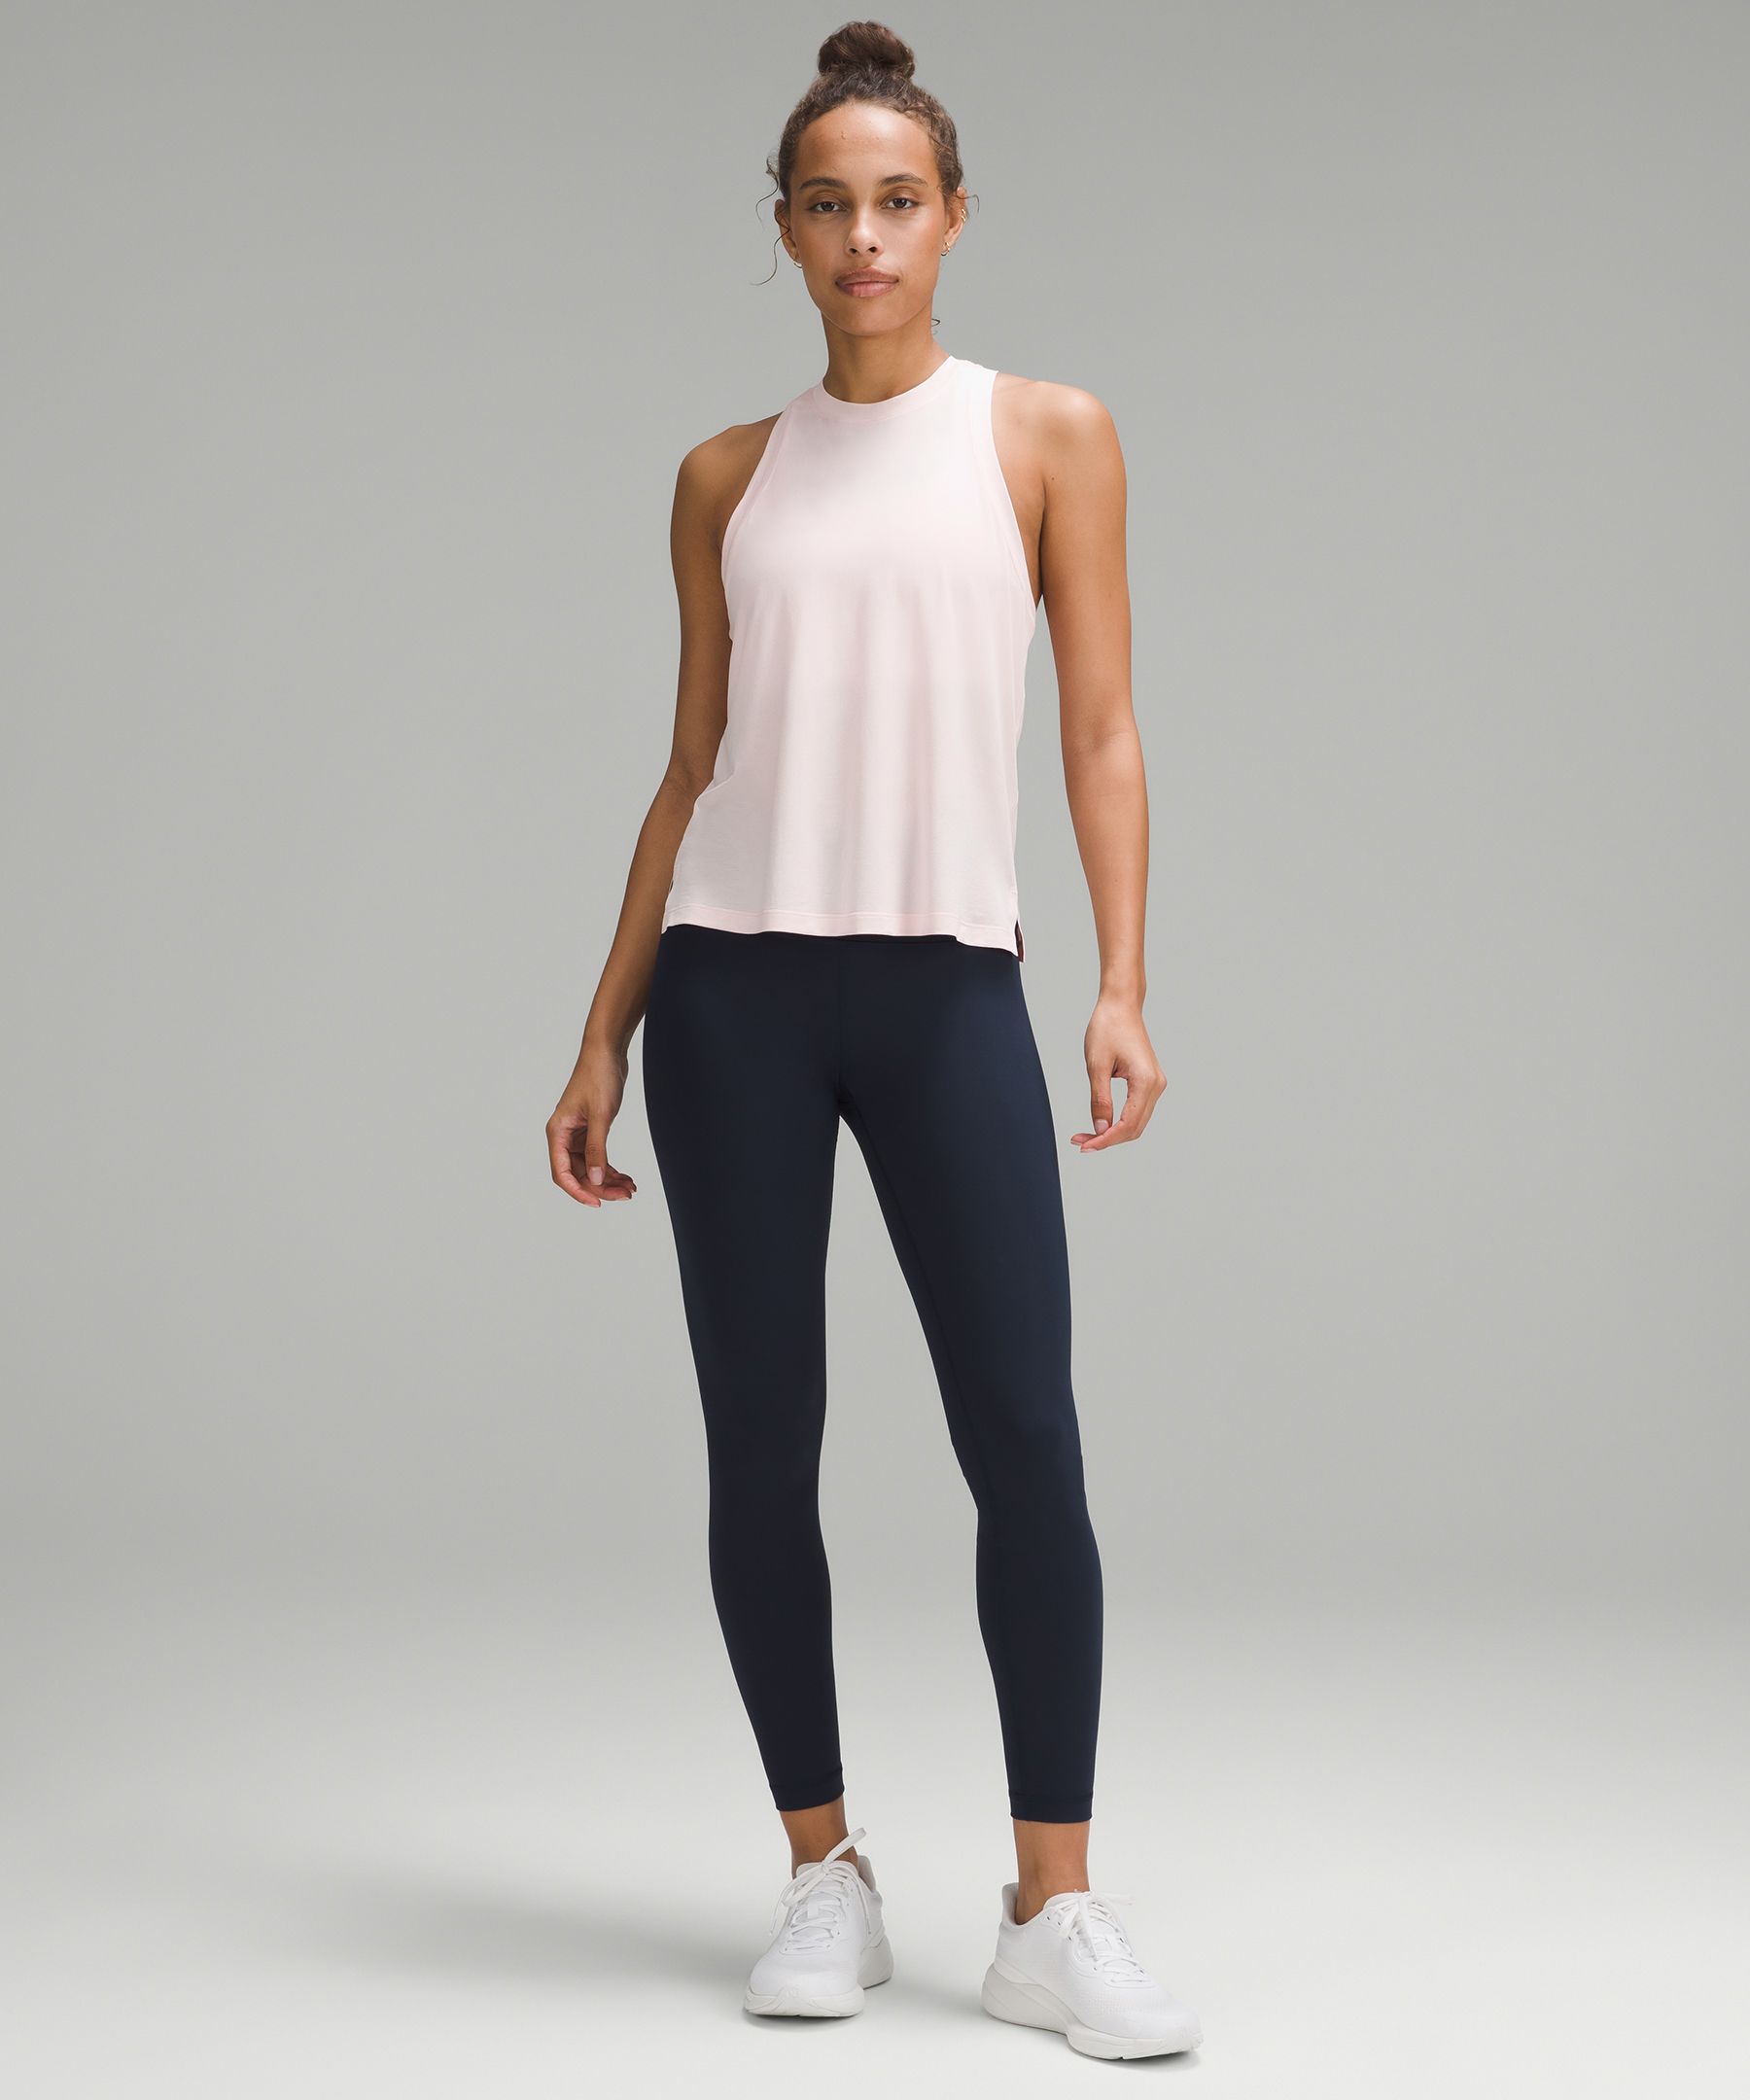 This $68 Lululemon workout tank top is 'perfect' for people with